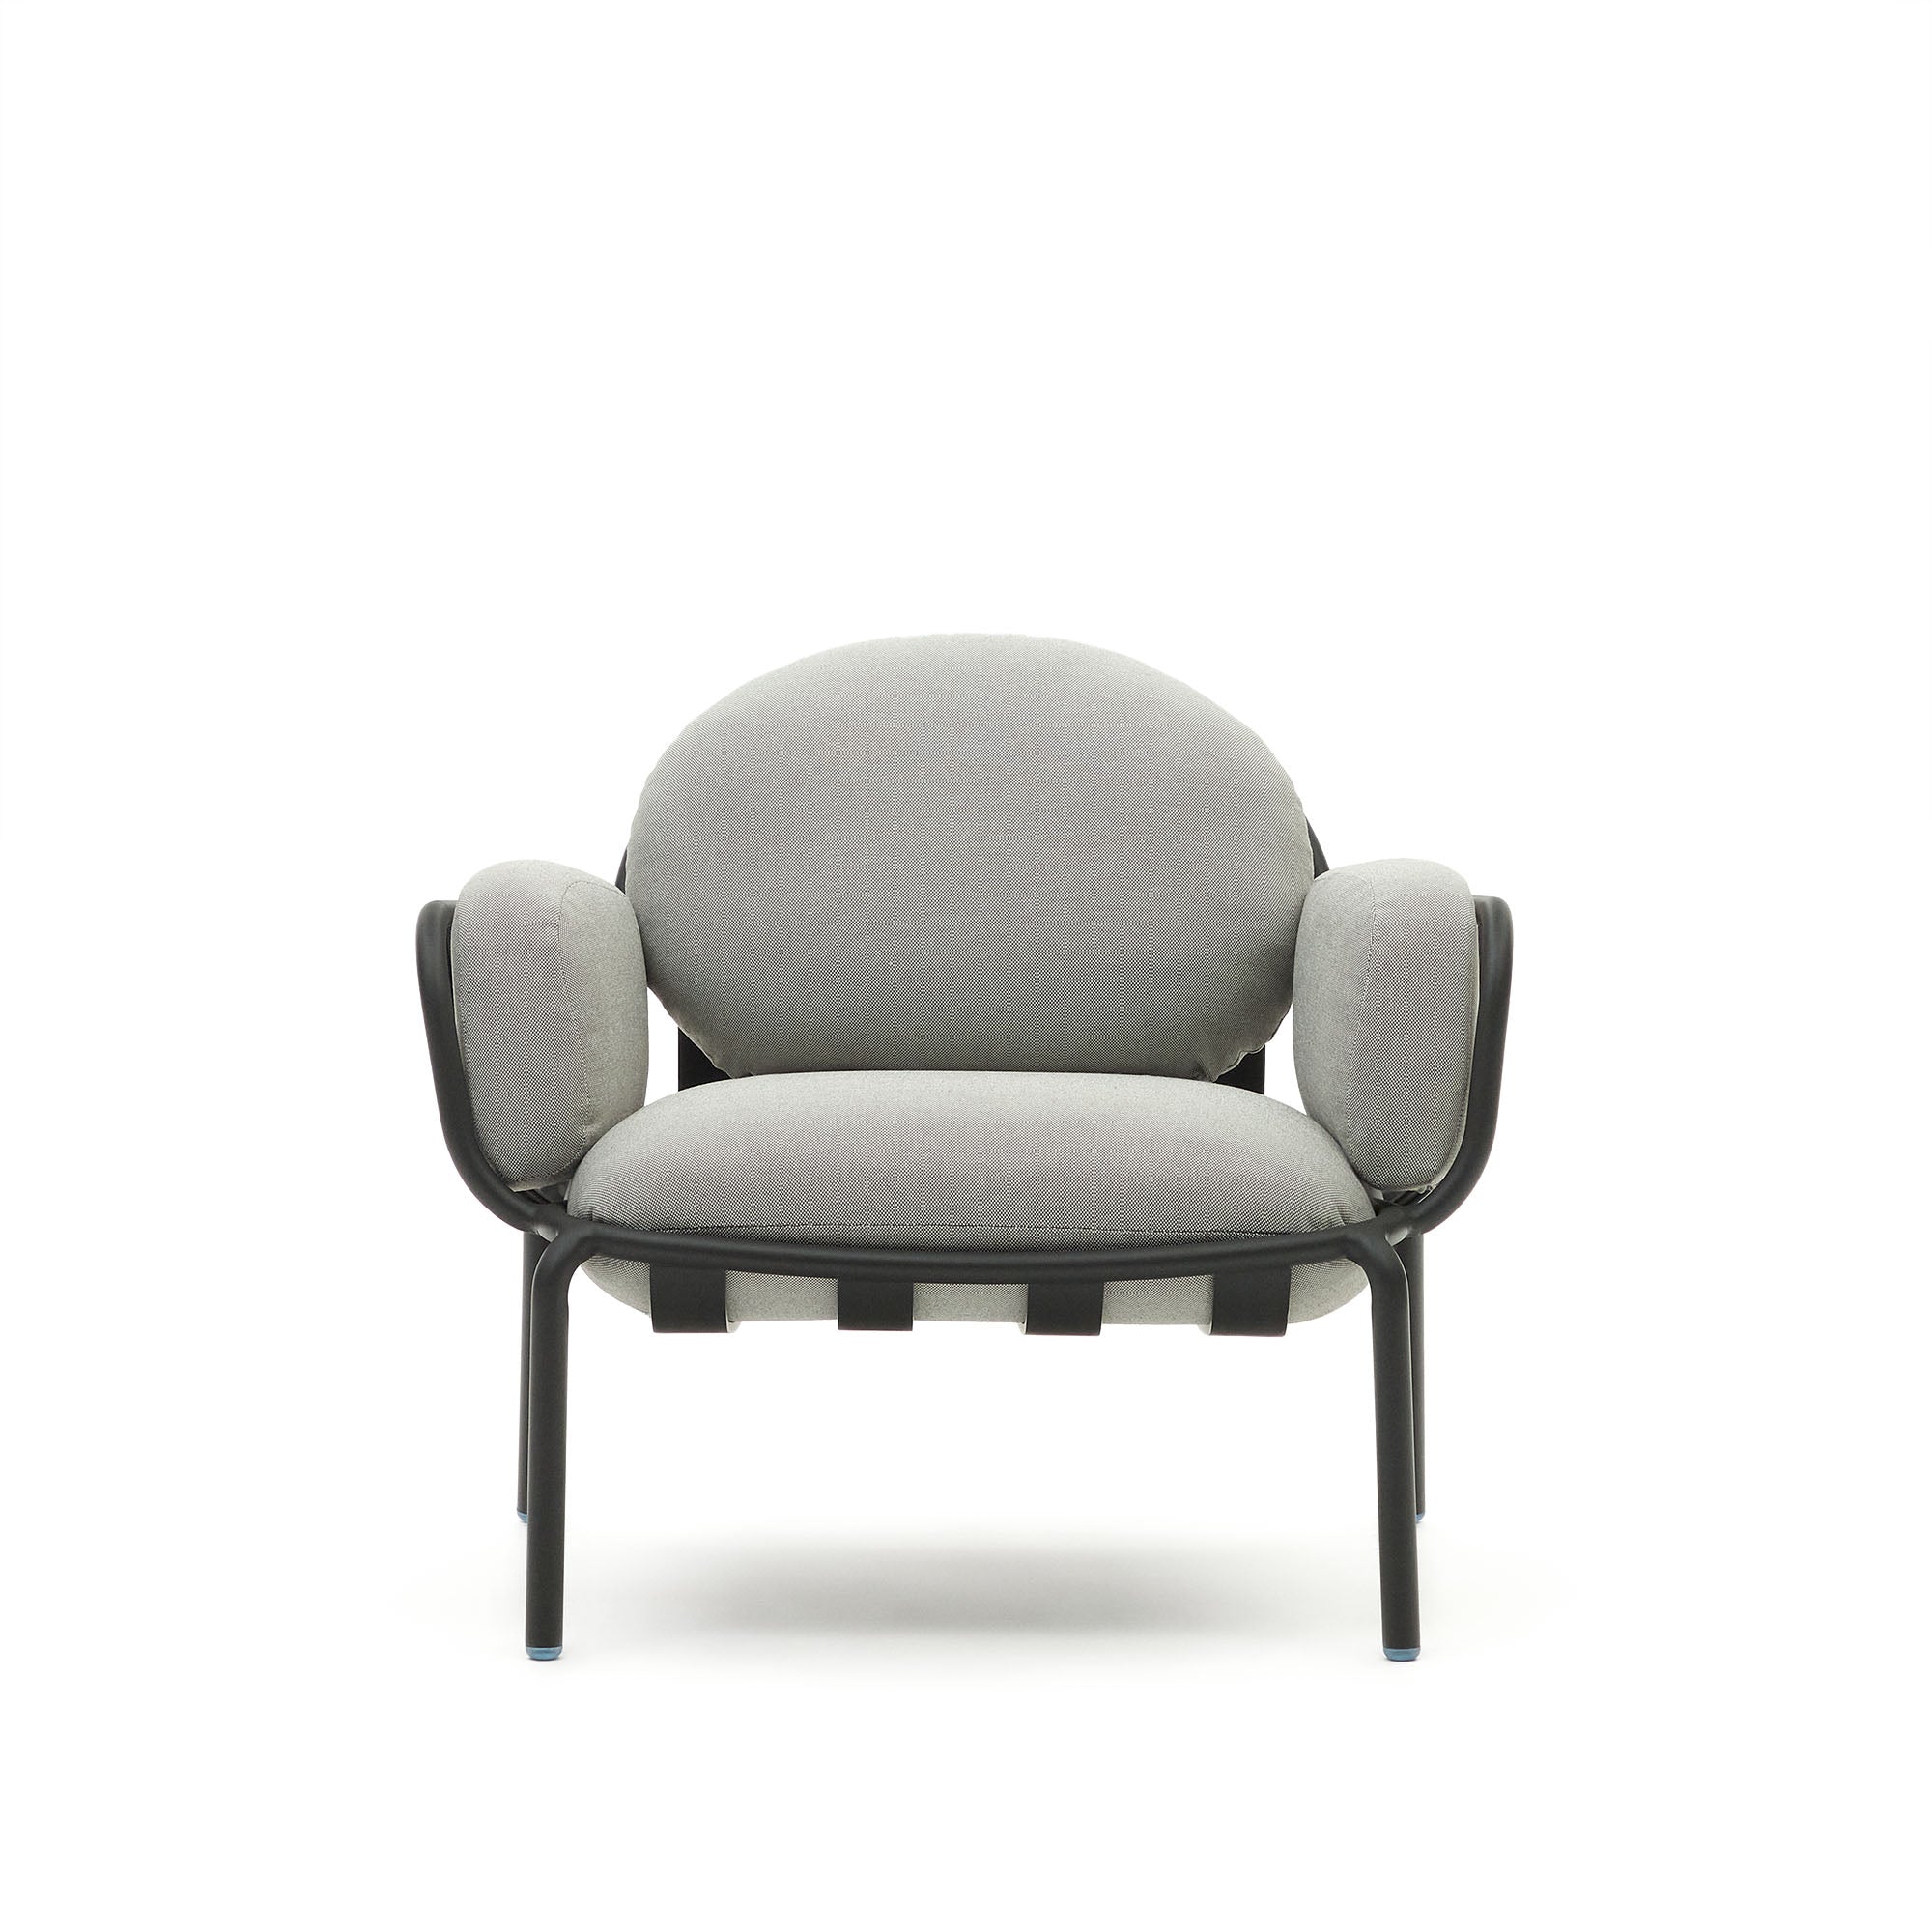 Joncols outdoor aluminium armchair with a powder coated grey finish